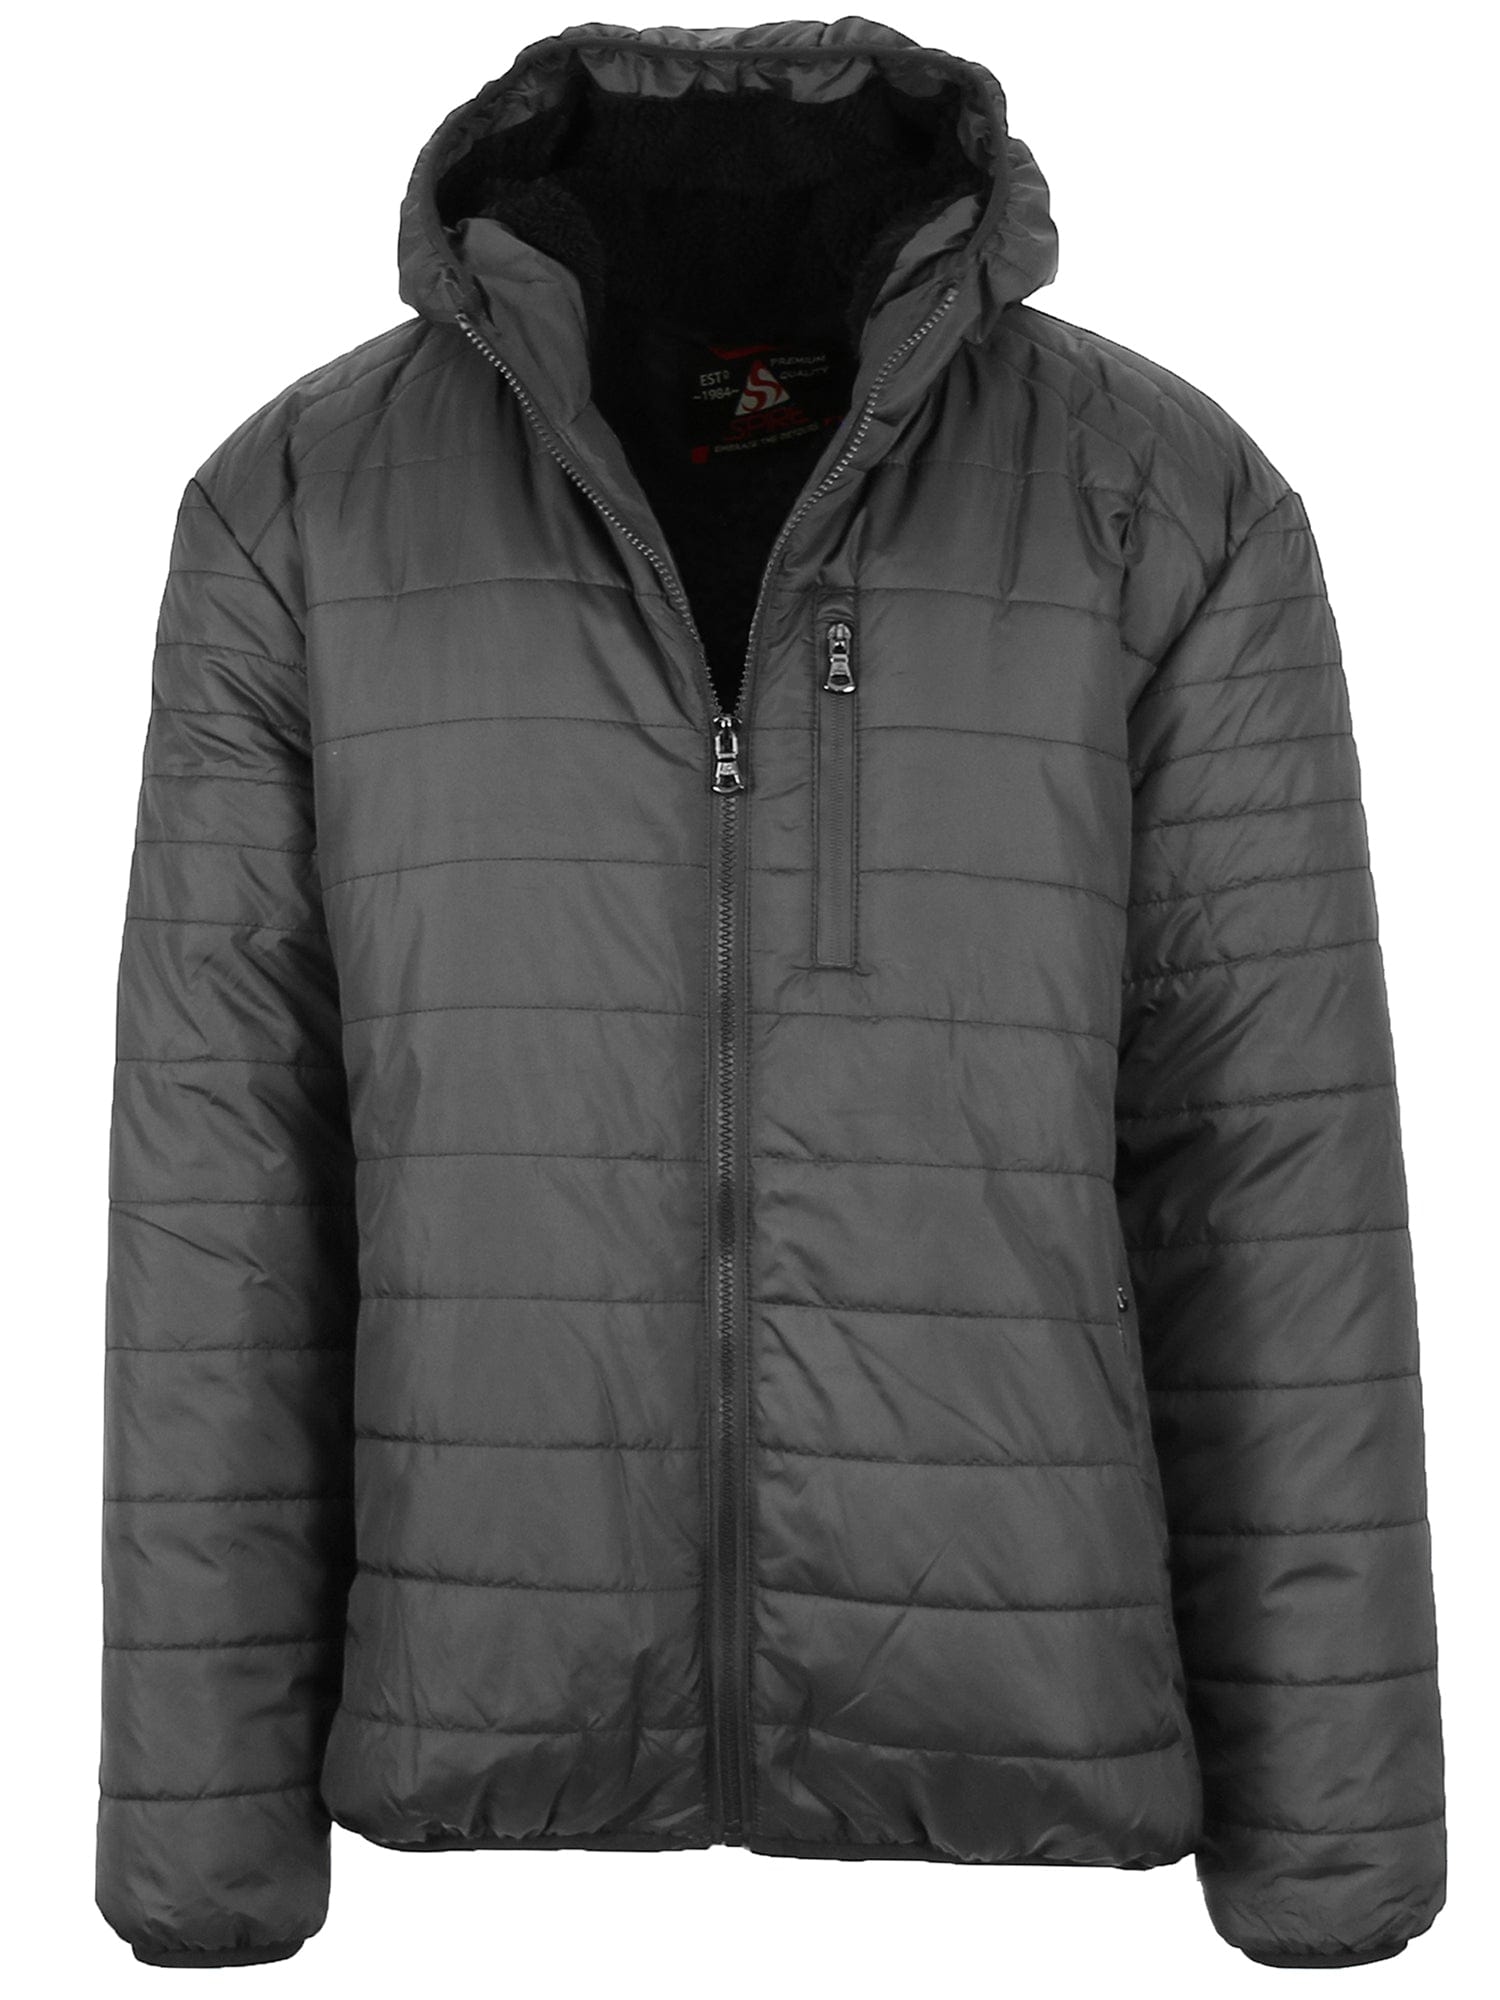 Men's Sherpa Lined Hooded Puffer Jacket - GalaxybyHarvic